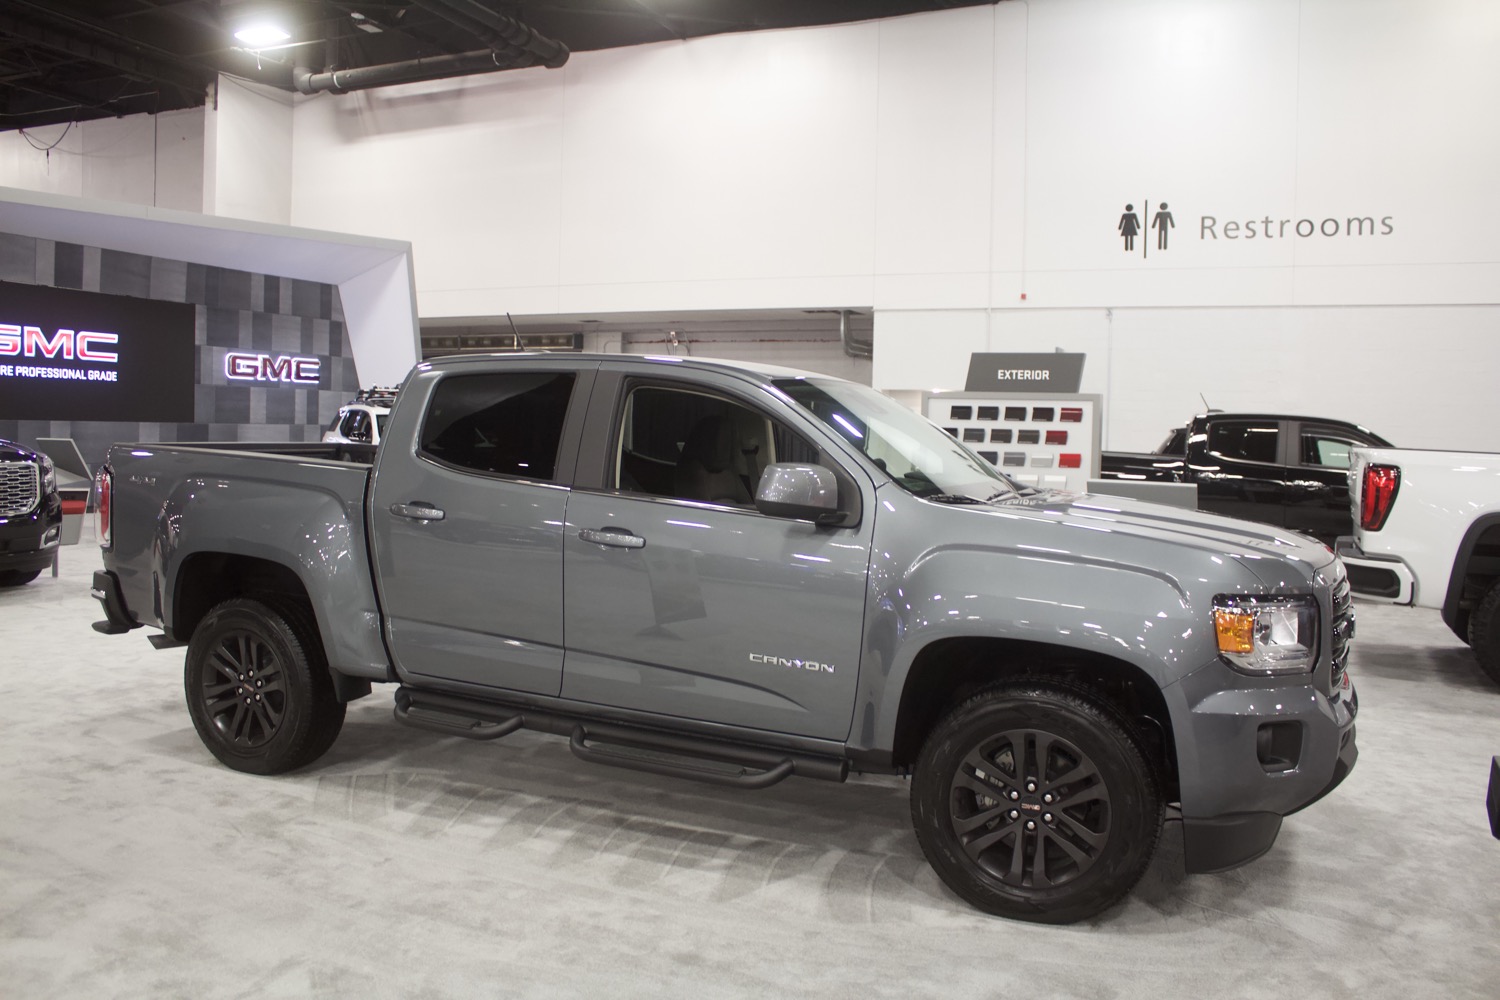 2020 Gmc Canyon Elevation Edition Live Photo Gallery Gm Authority